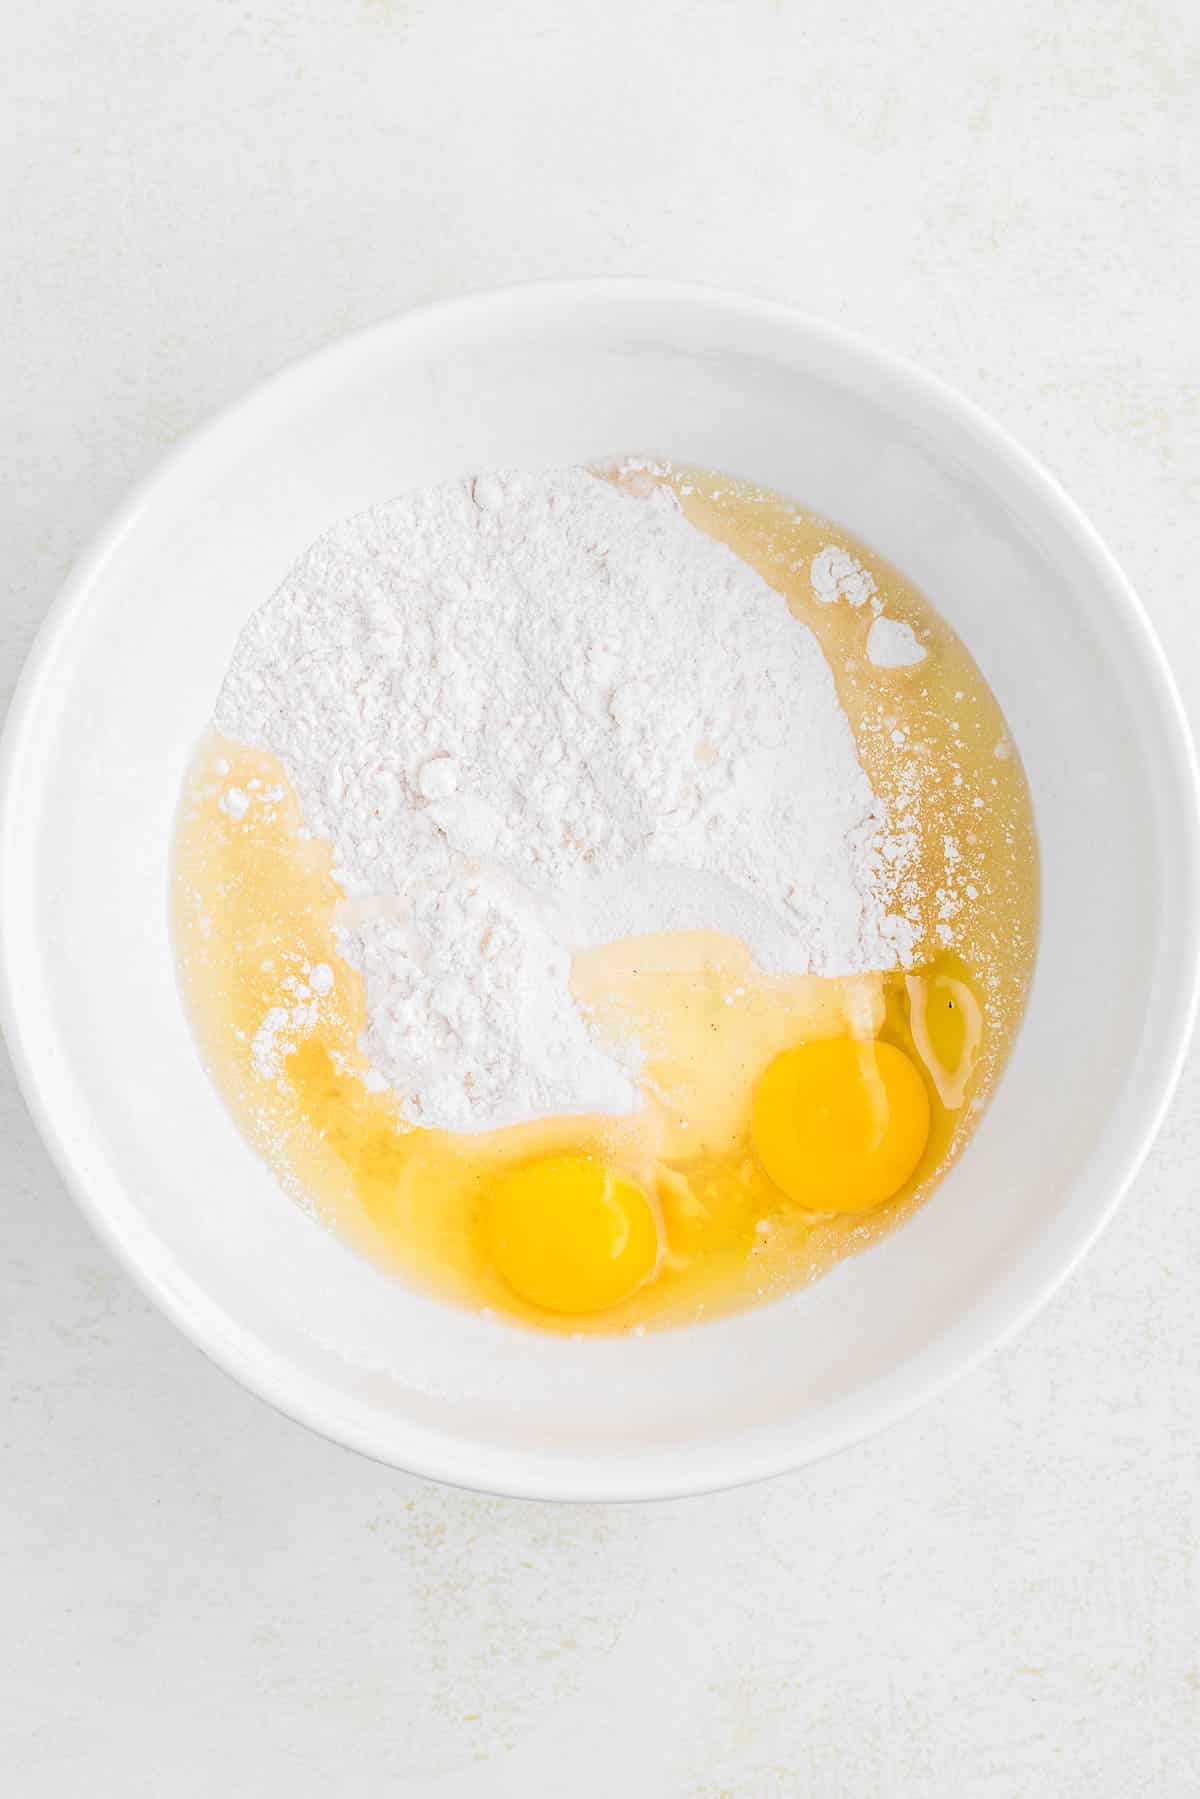 Small bowl of eggs, cake mix and vegetable oil.